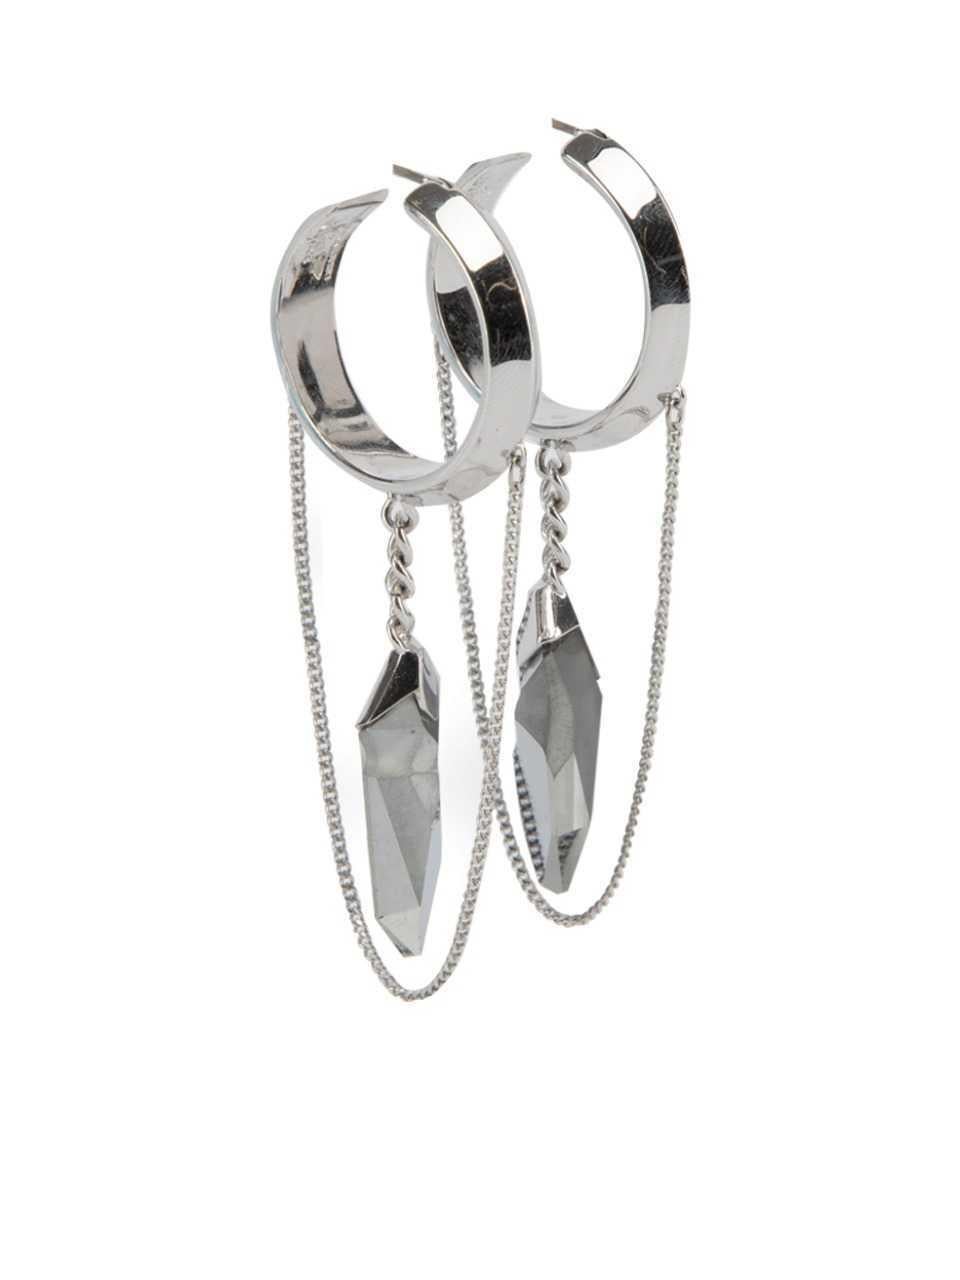 CONDITION is Very good. Hardly any visible wear to earrings is evident on this used Jean Paul Gaultier designer resale item. Details SIlver Siliver Hoop Earrings with chain and gem accents Composition 100% Silver Size & Fit Length: 8. 8cm/ 3. 5in